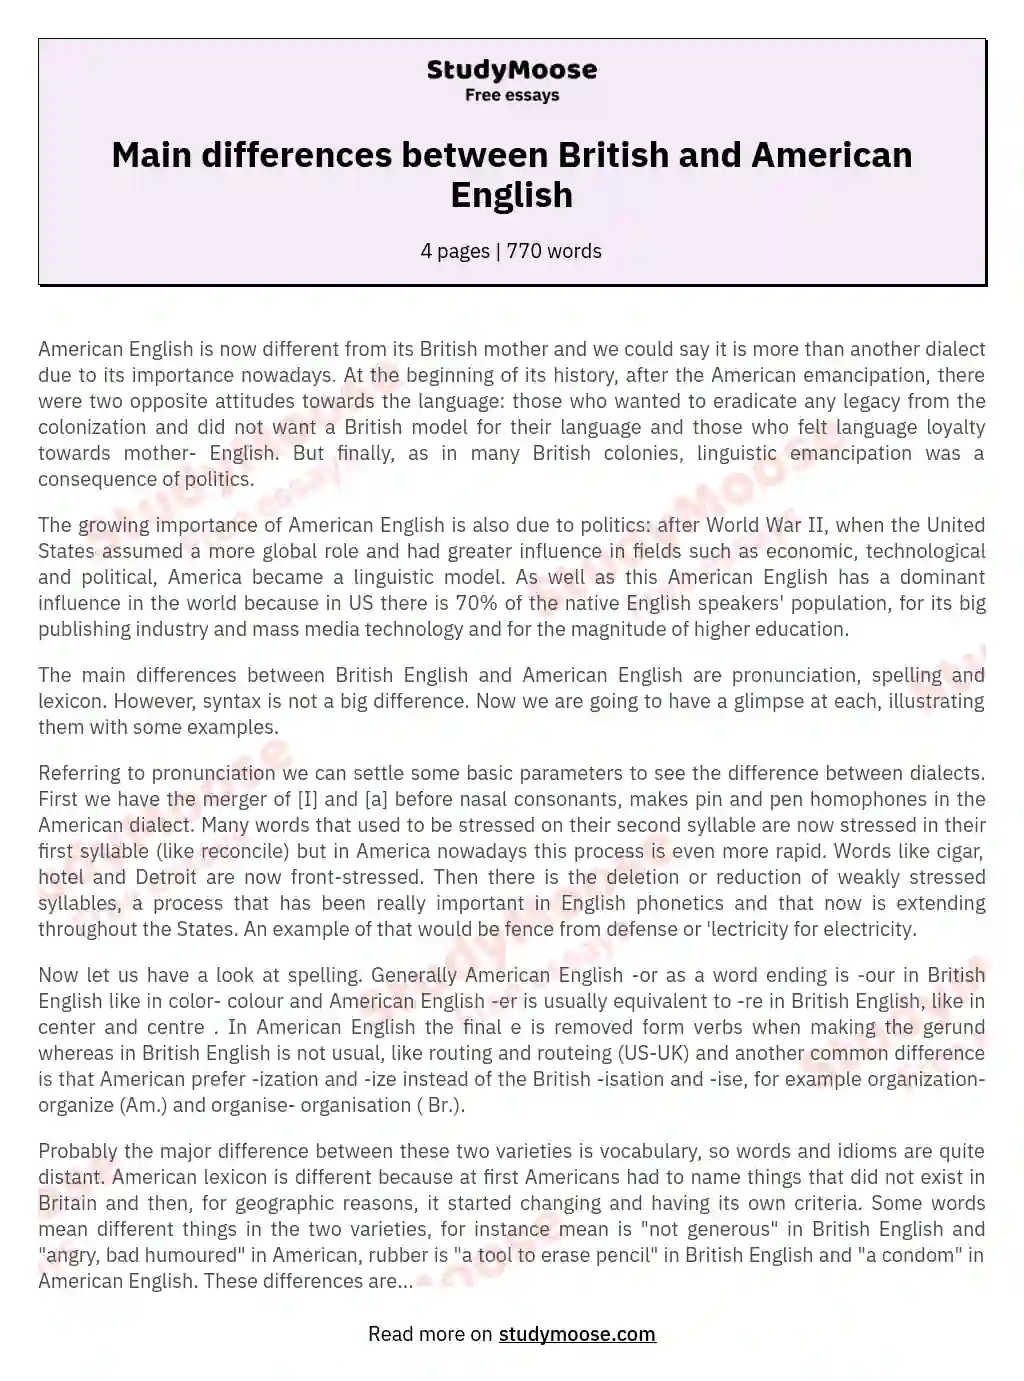 Main differences between British and American English essay